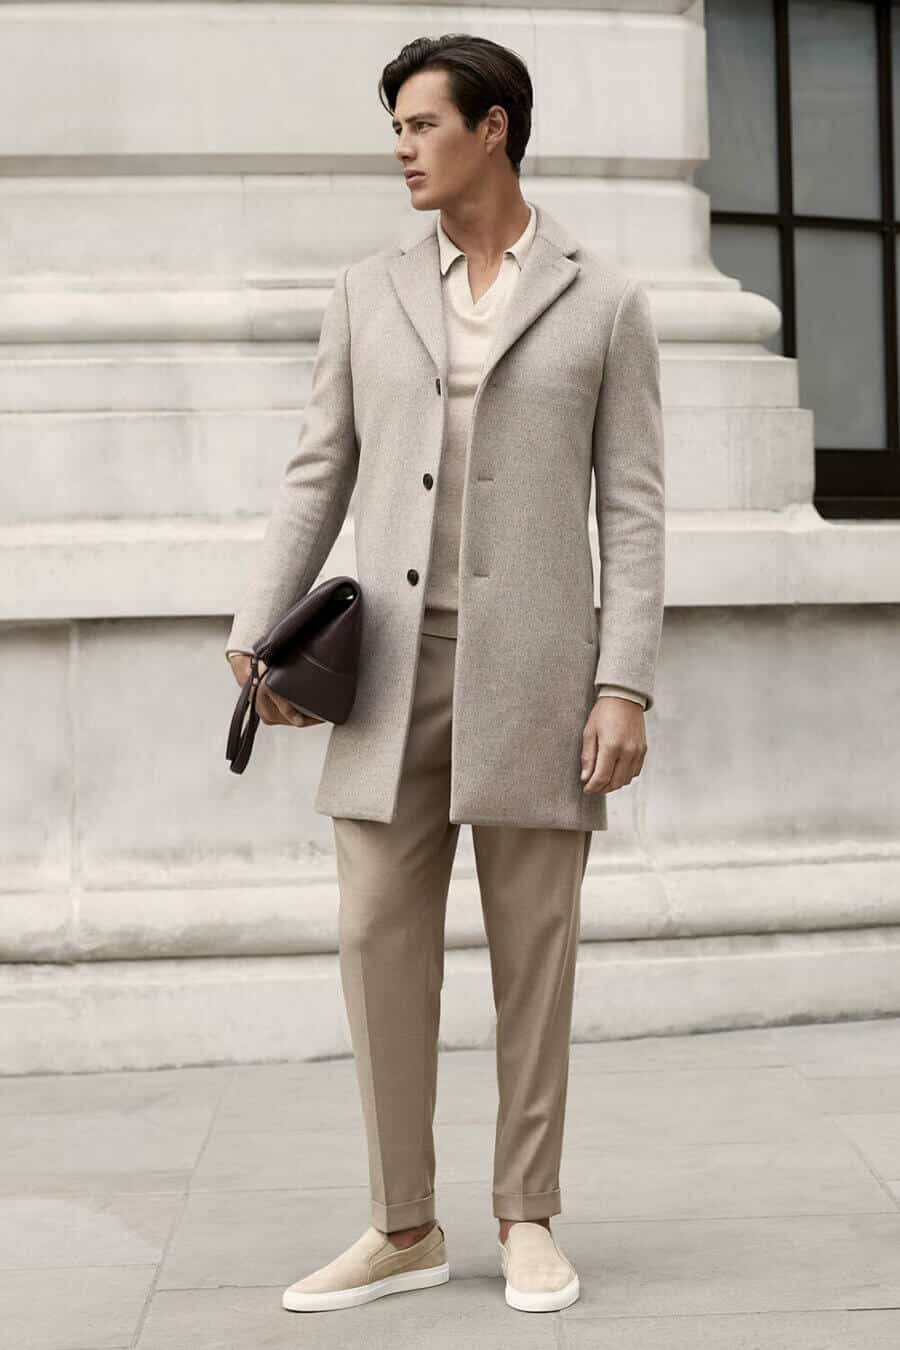 Men's tonal outfit with beige trousers, overcoat and knitted polo shirt